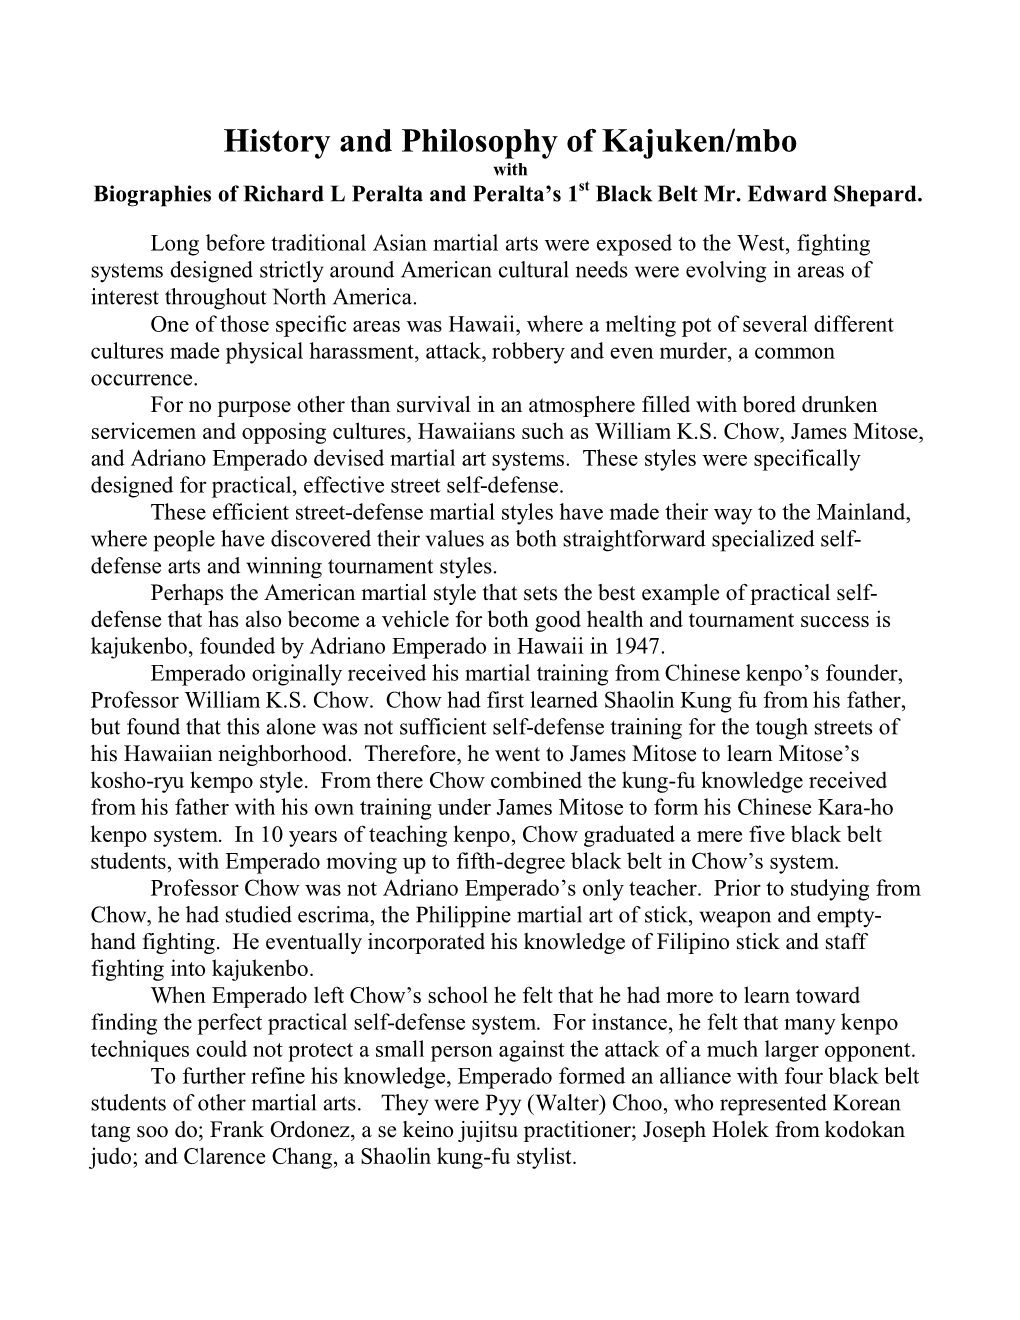 History and Philosophy of Kajuken/Mbo with Biographies of Richard L Peralta and Peralta’S 1St Black Belt Mr